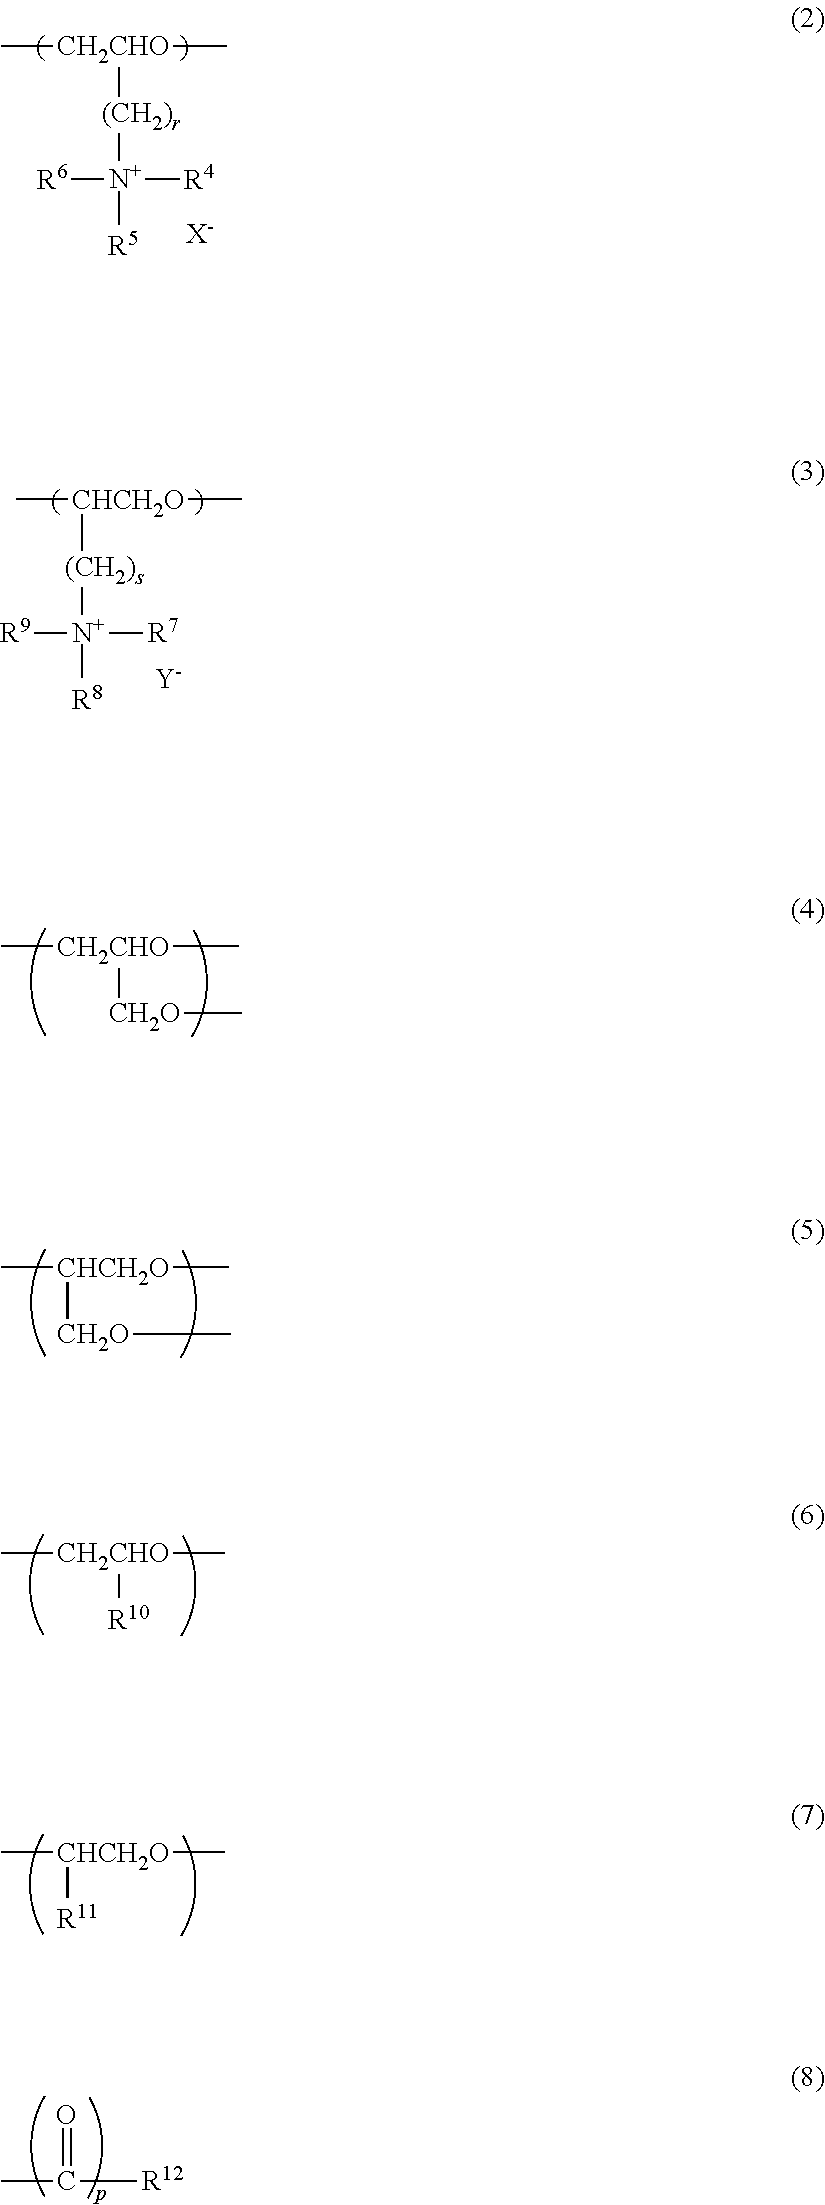 Cellulose ether containing cationic group